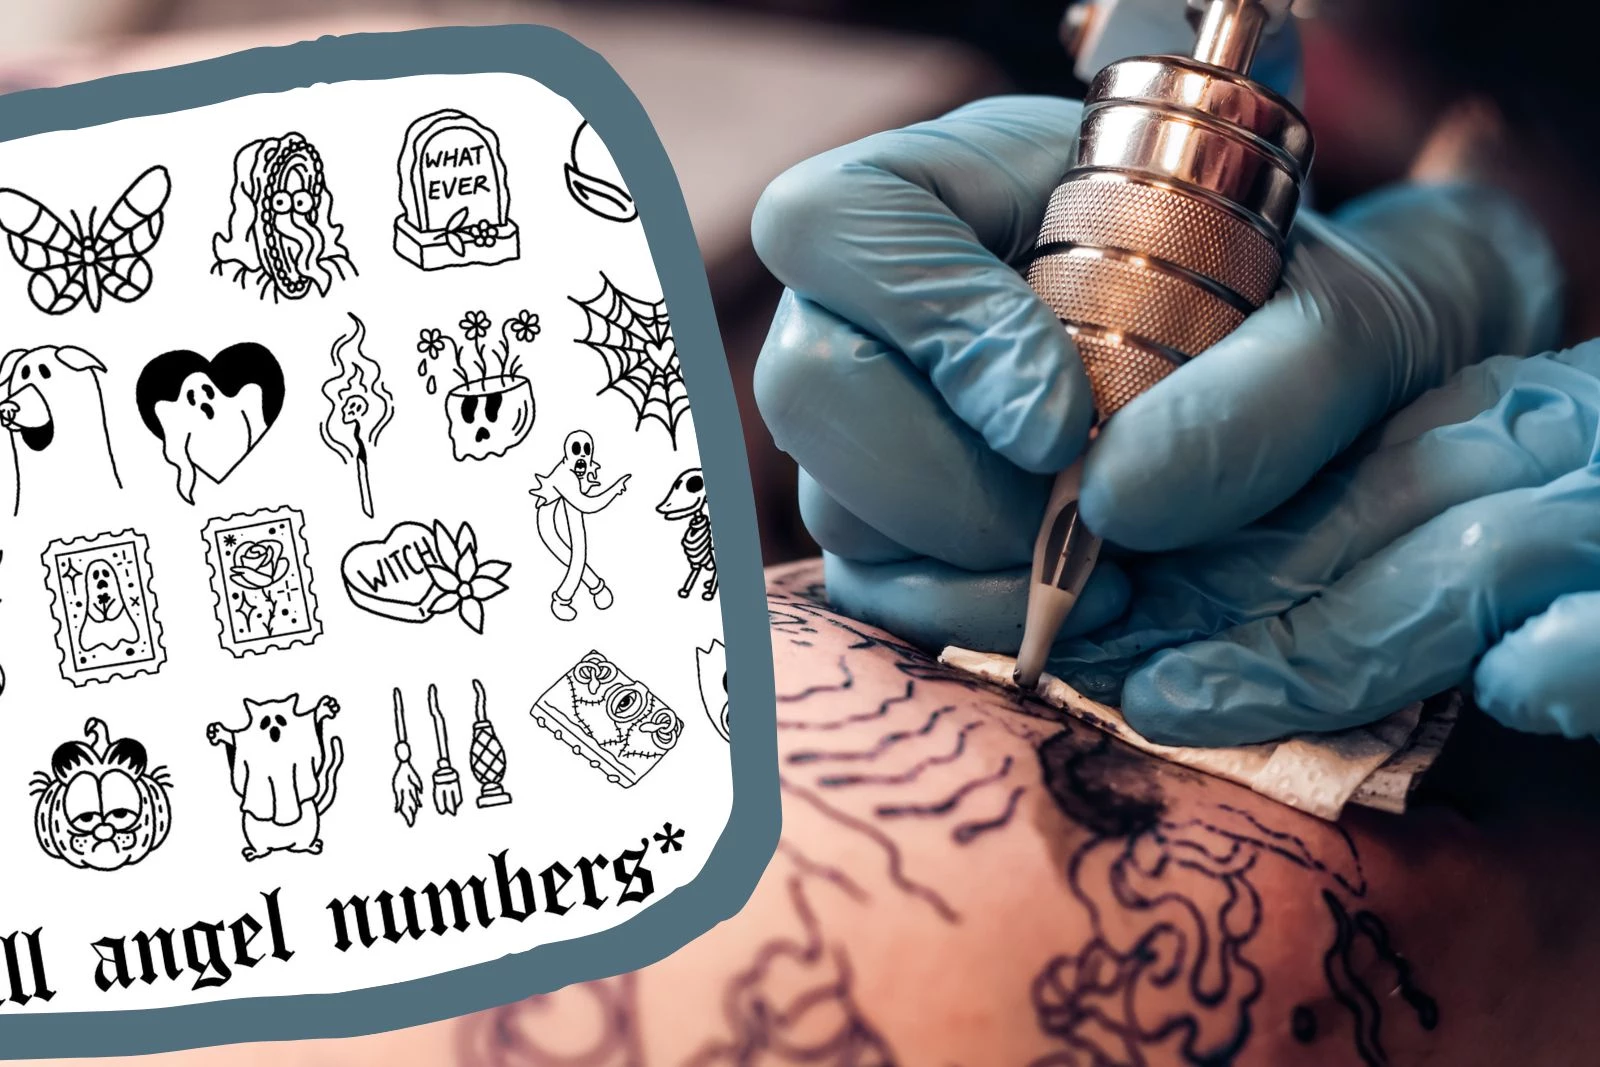 Spotify tattoo trend has some people regretting their ink